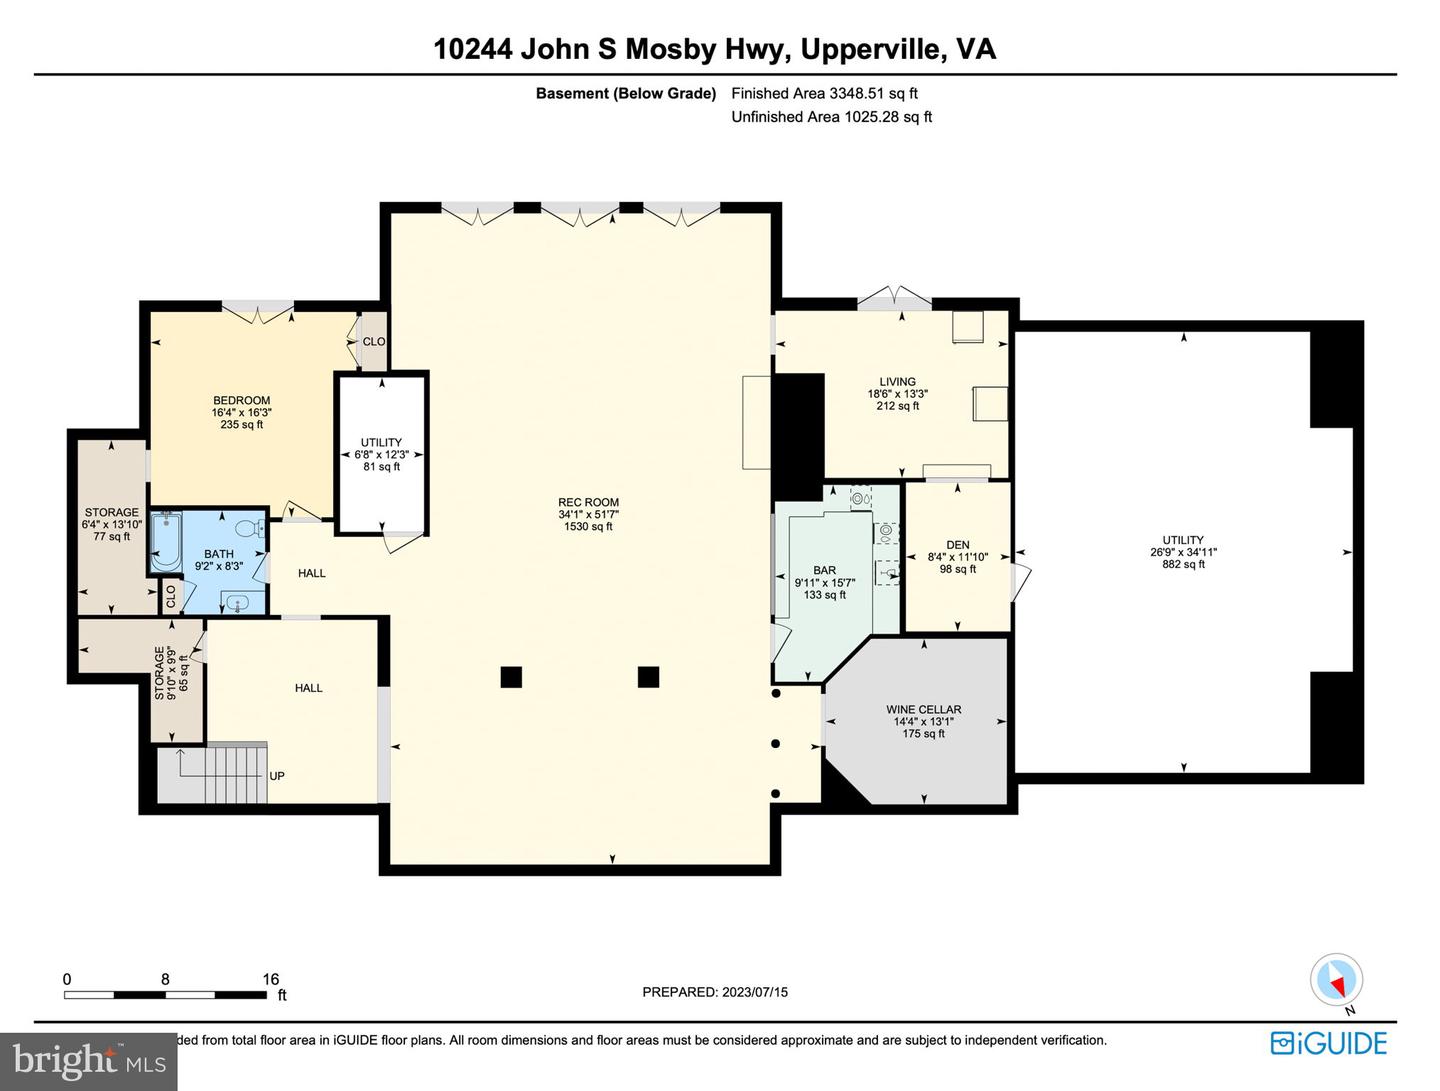 10244 JOHN S MOSBY HWY, UPPERVILLE, Virginia 20184, 5 Bedrooms Bedrooms, ,4 BathroomsBathrooms,Residential,For sale,10244 JOHN S MOSBY HWY,VALO2054174 MLS # VALO2054174